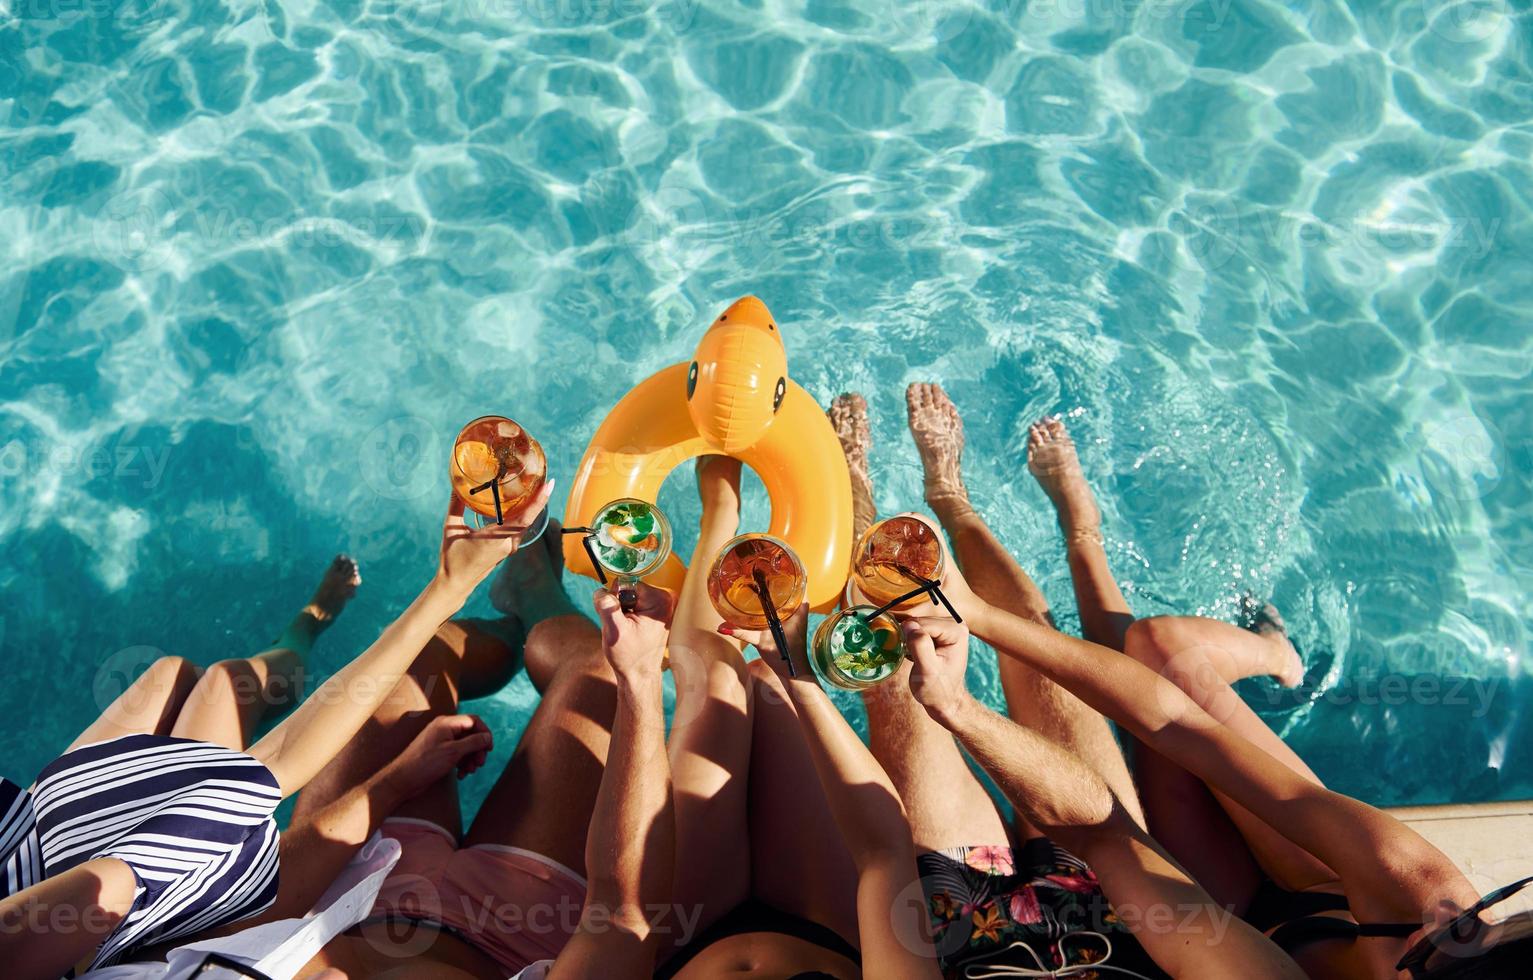 Top view of group of young happy people that have fun in swimming pool at daytime photo